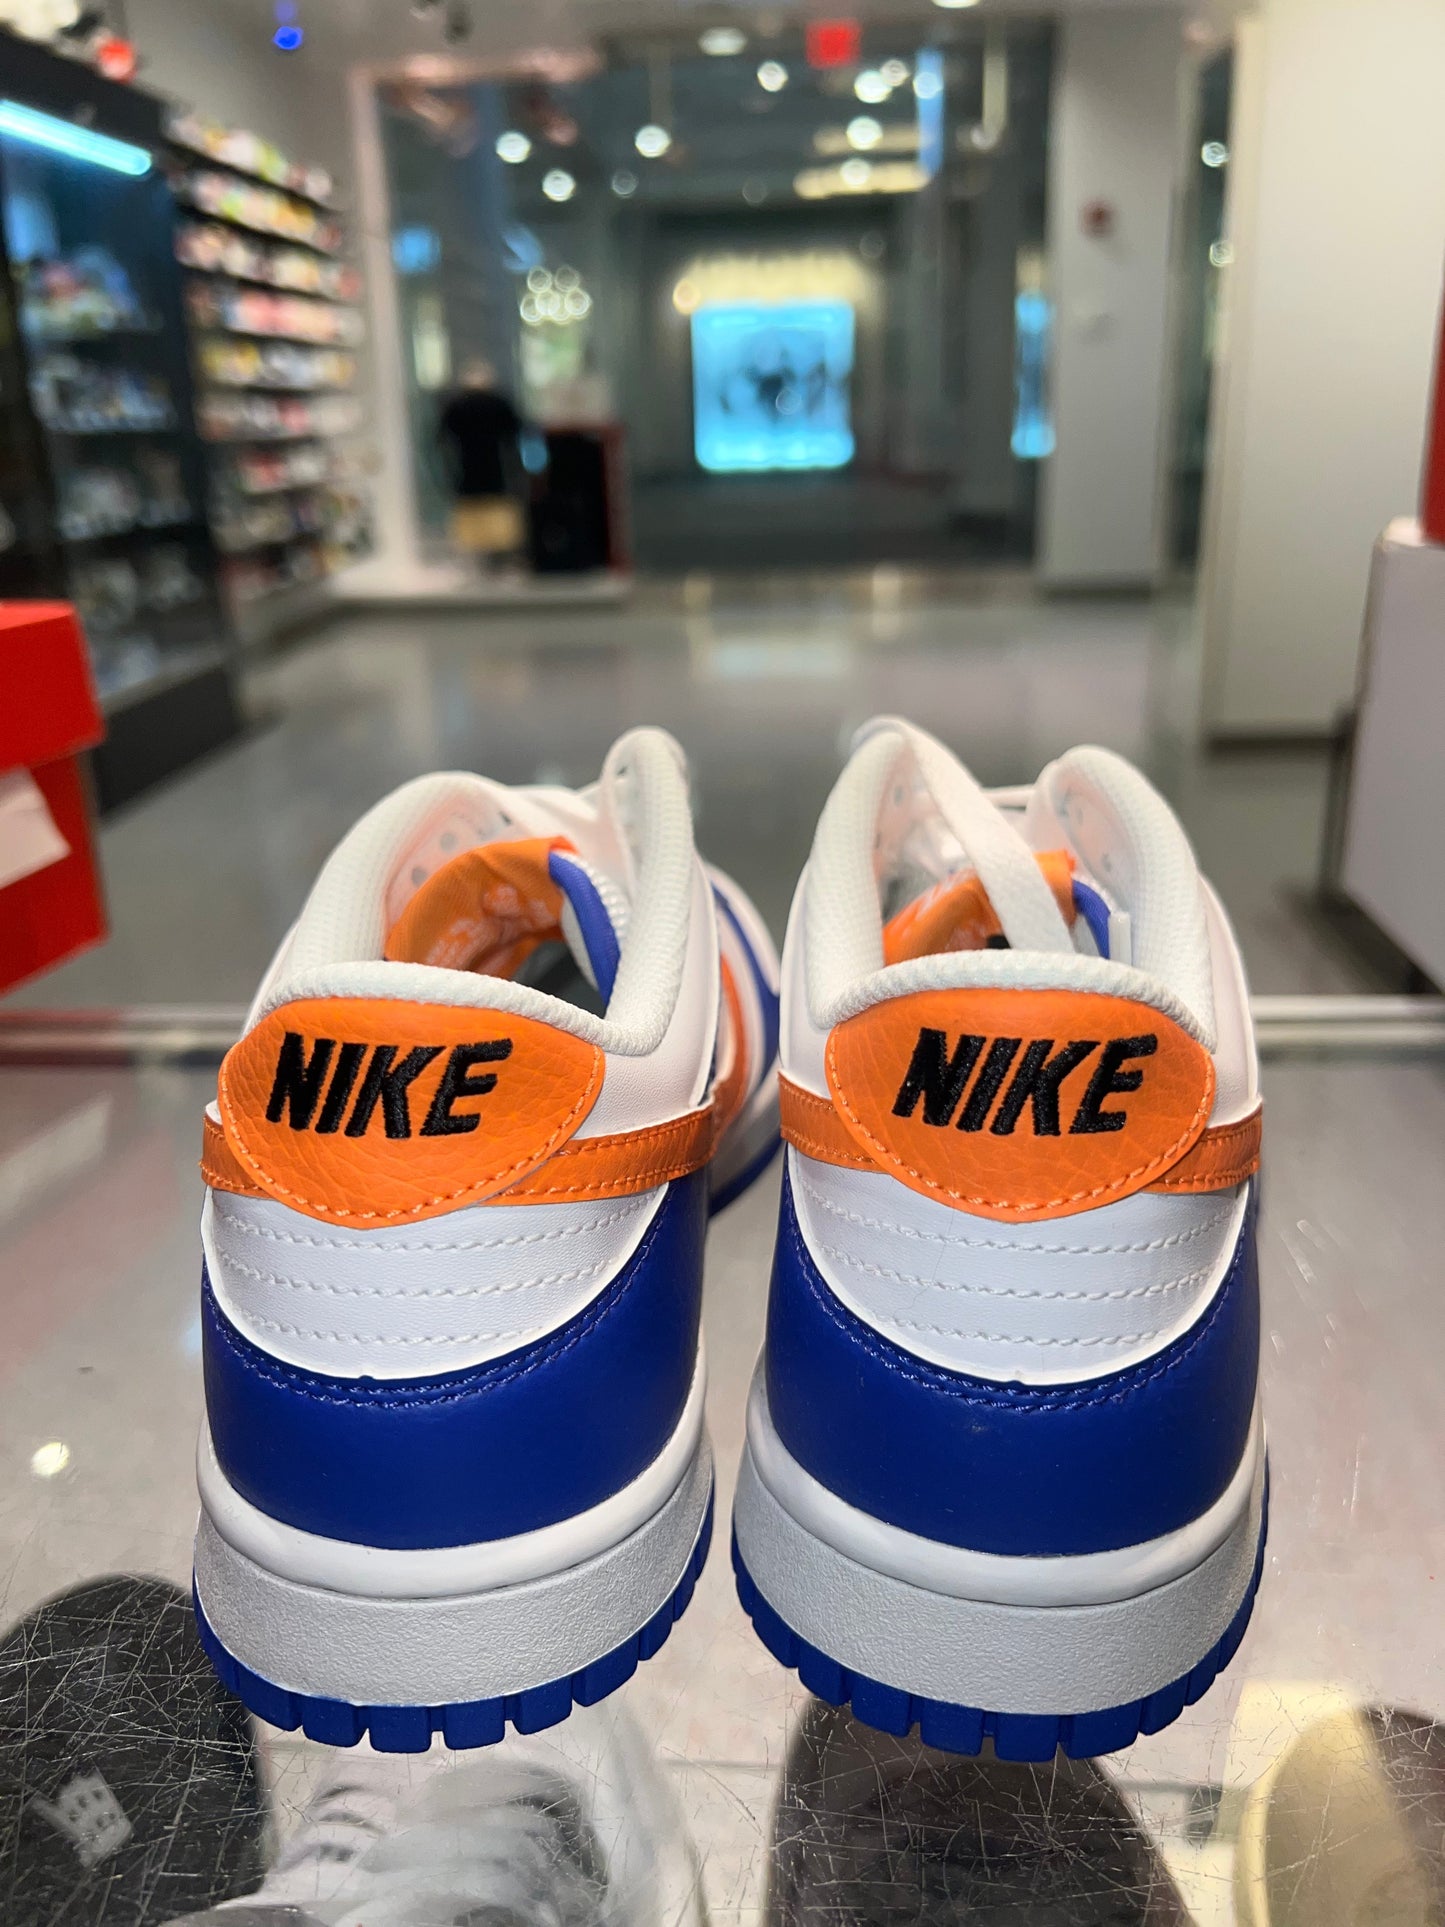 Size 6.5Y Dunk Low “Knicks” Brand New (Mall)